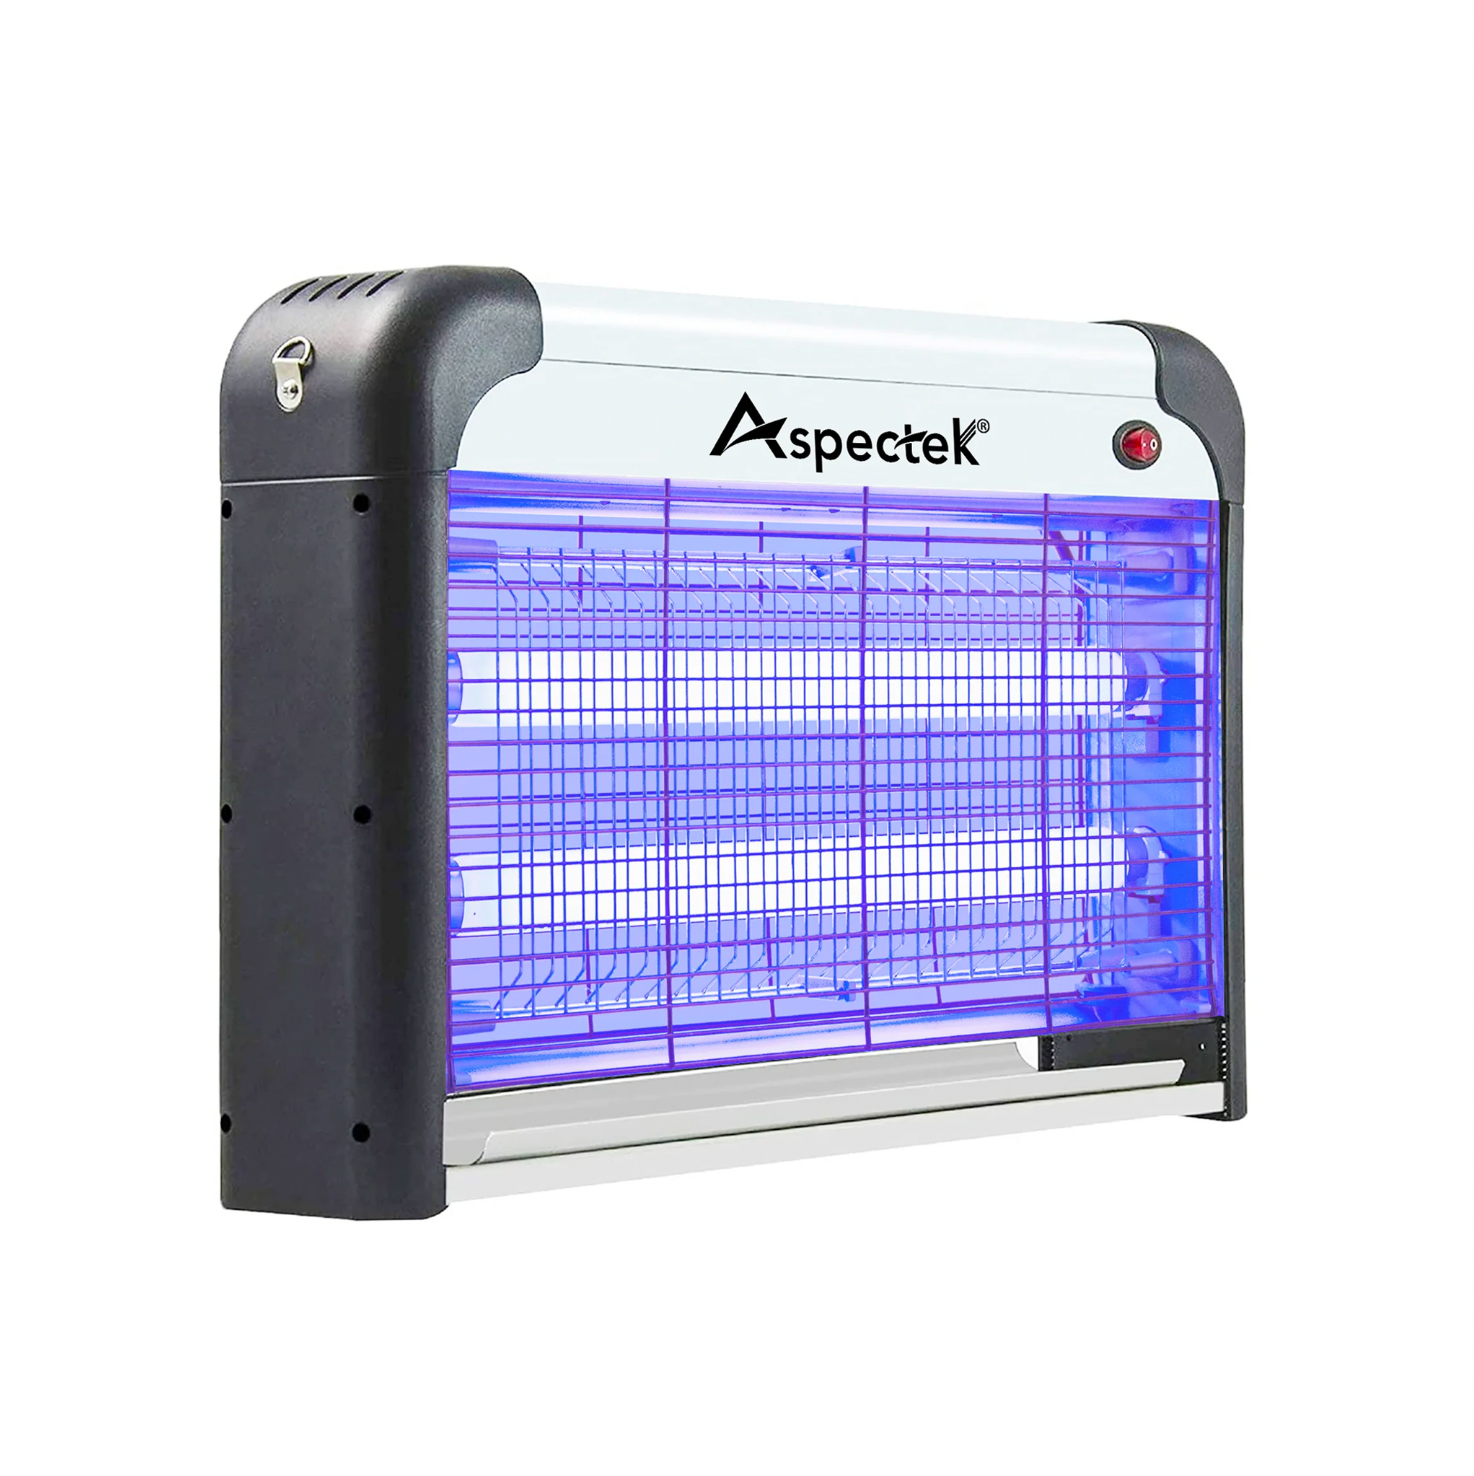 Aspectek 20W Indoor Bug Zapper, Powerful UV Bugs Lamp Attract Insects and 2800V Grid Kills Flying Insects SOLID BLACK